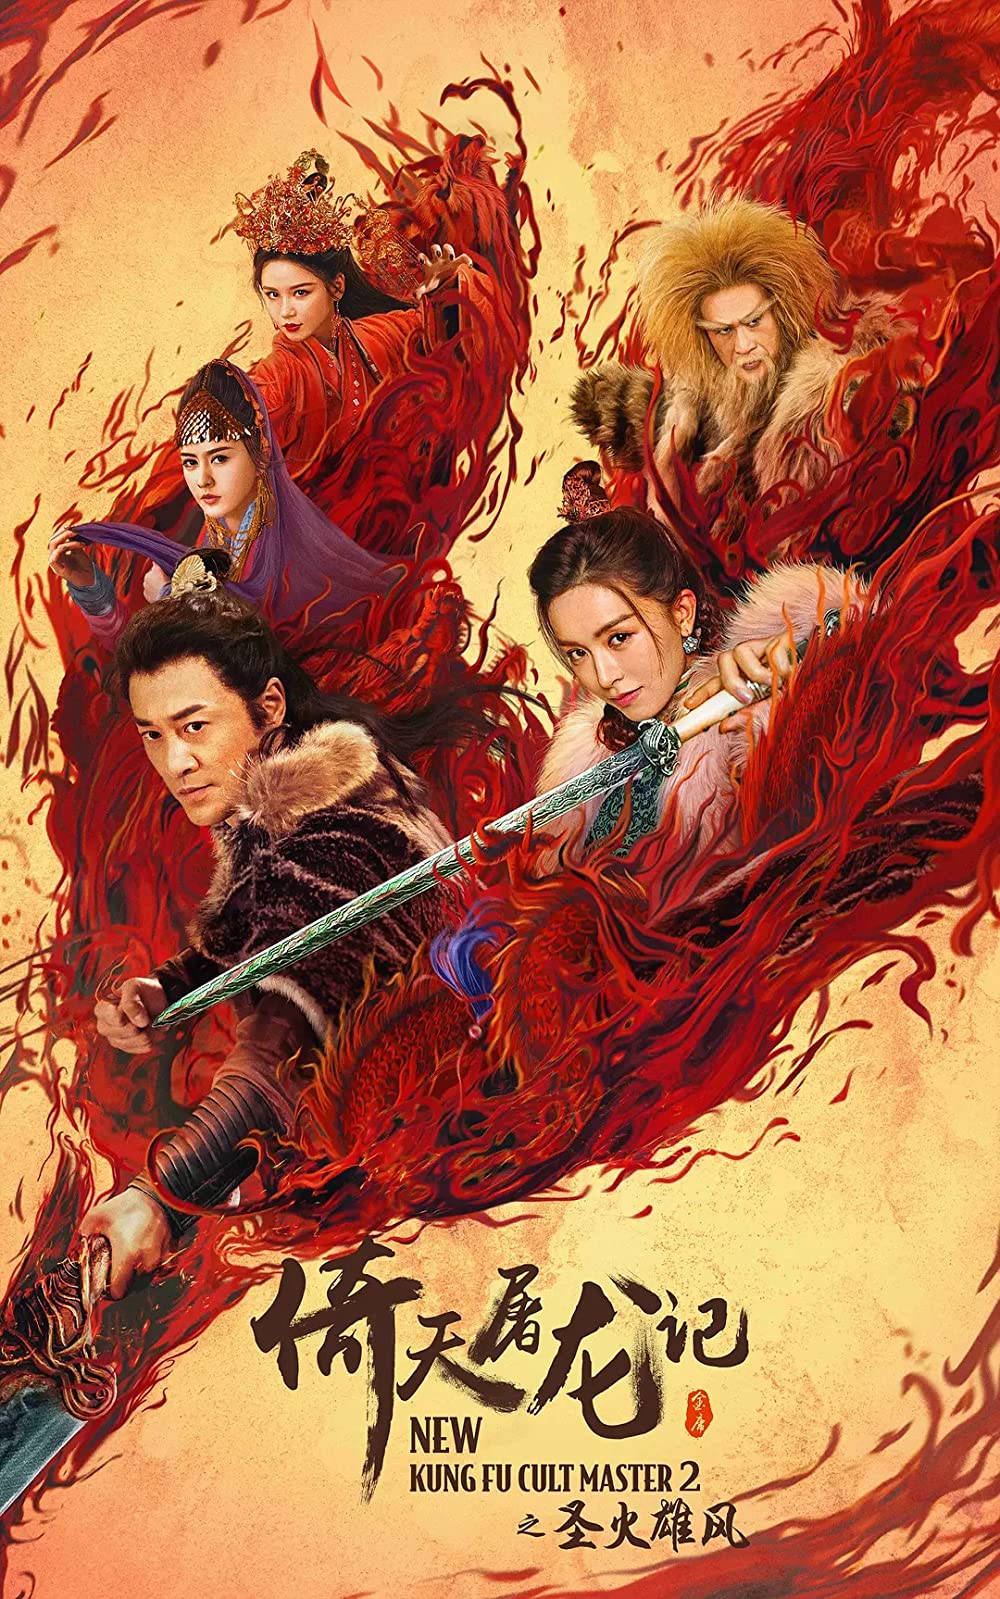 New Kung Fu Cult Master 2 (2022) 720p HDRip Full Chinese Movie ESubs [850MB]